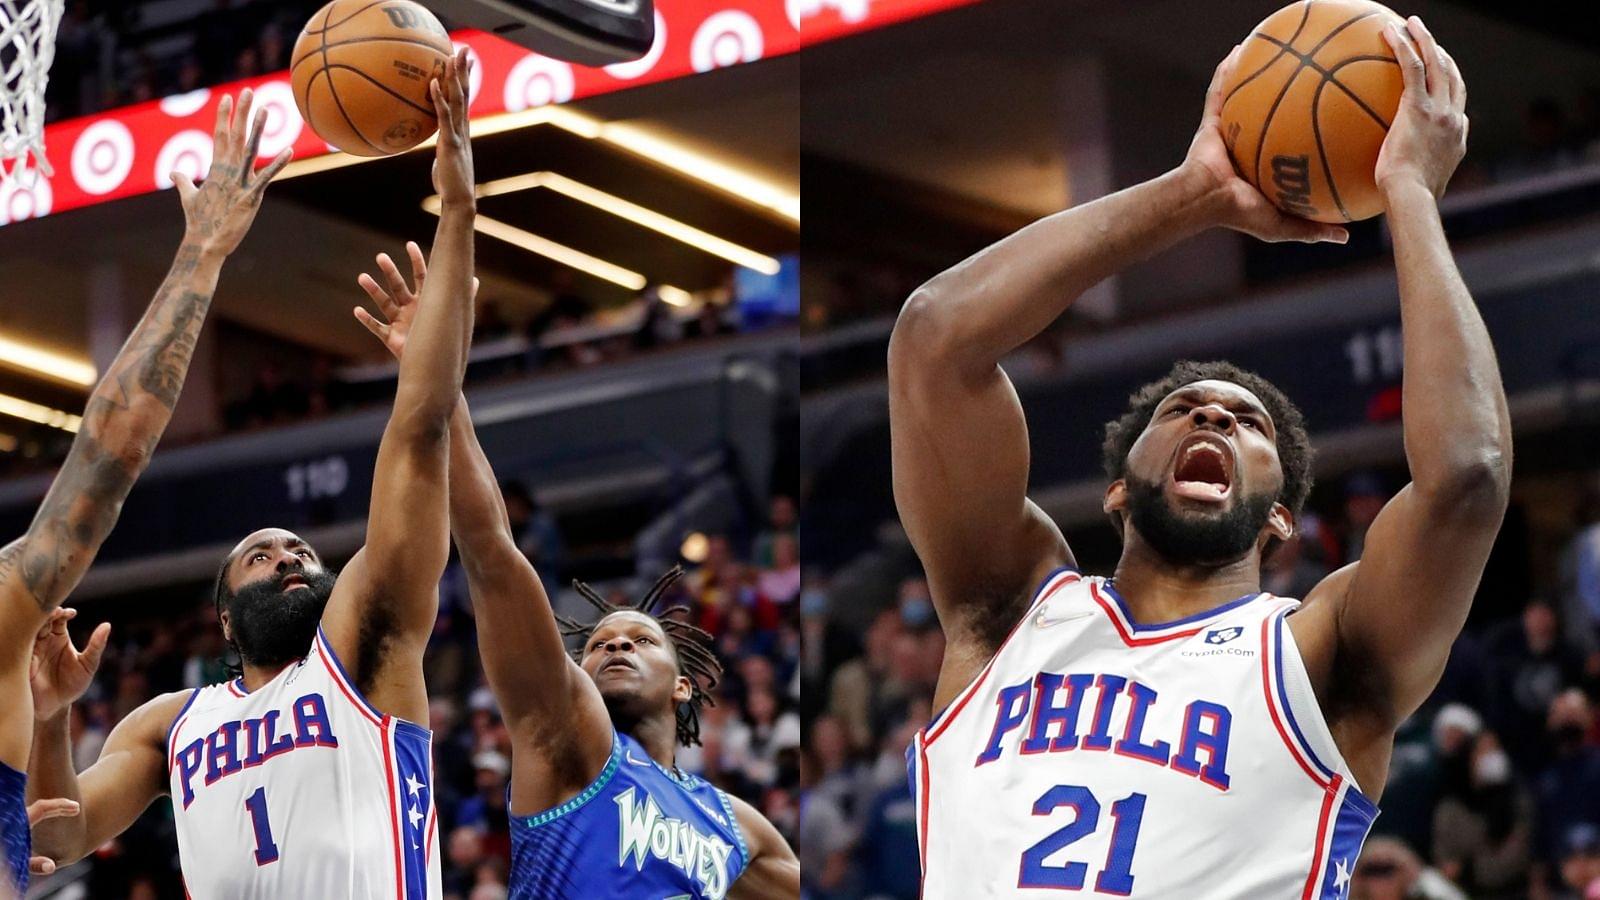 "It’s going to be hard to defend James Harden and Joel Embiid without fouling": Kendrick Perkins warns the NBA about the Sixers stars' foul-drawing abilities